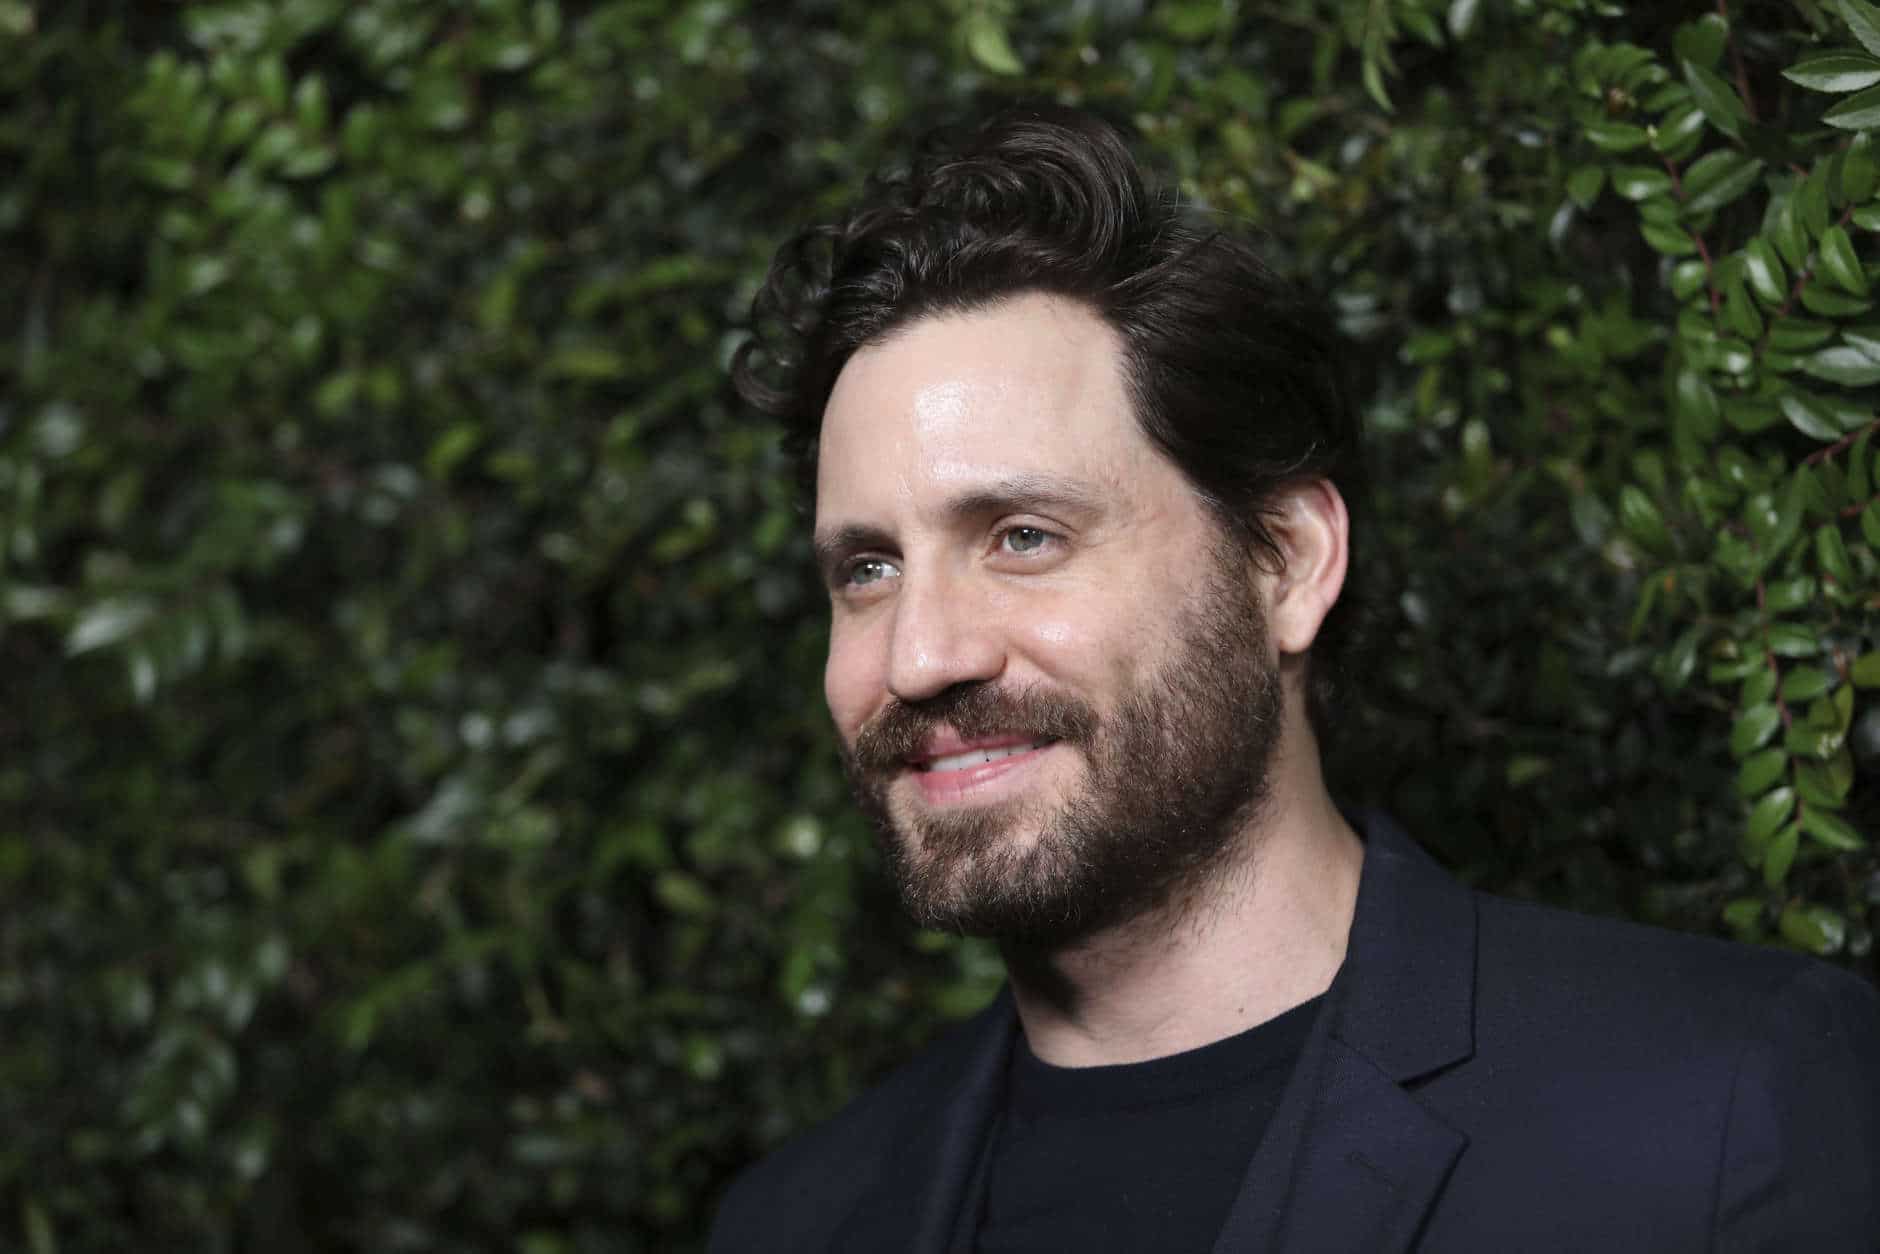 Edgar Ramirez arrives at the CHANEL Pre-Oscar Dinner at Madeo Restaurant on Saturday, March 3, 2018, in Los Angeles. (Photo by Omar Vega/Invision/AP)